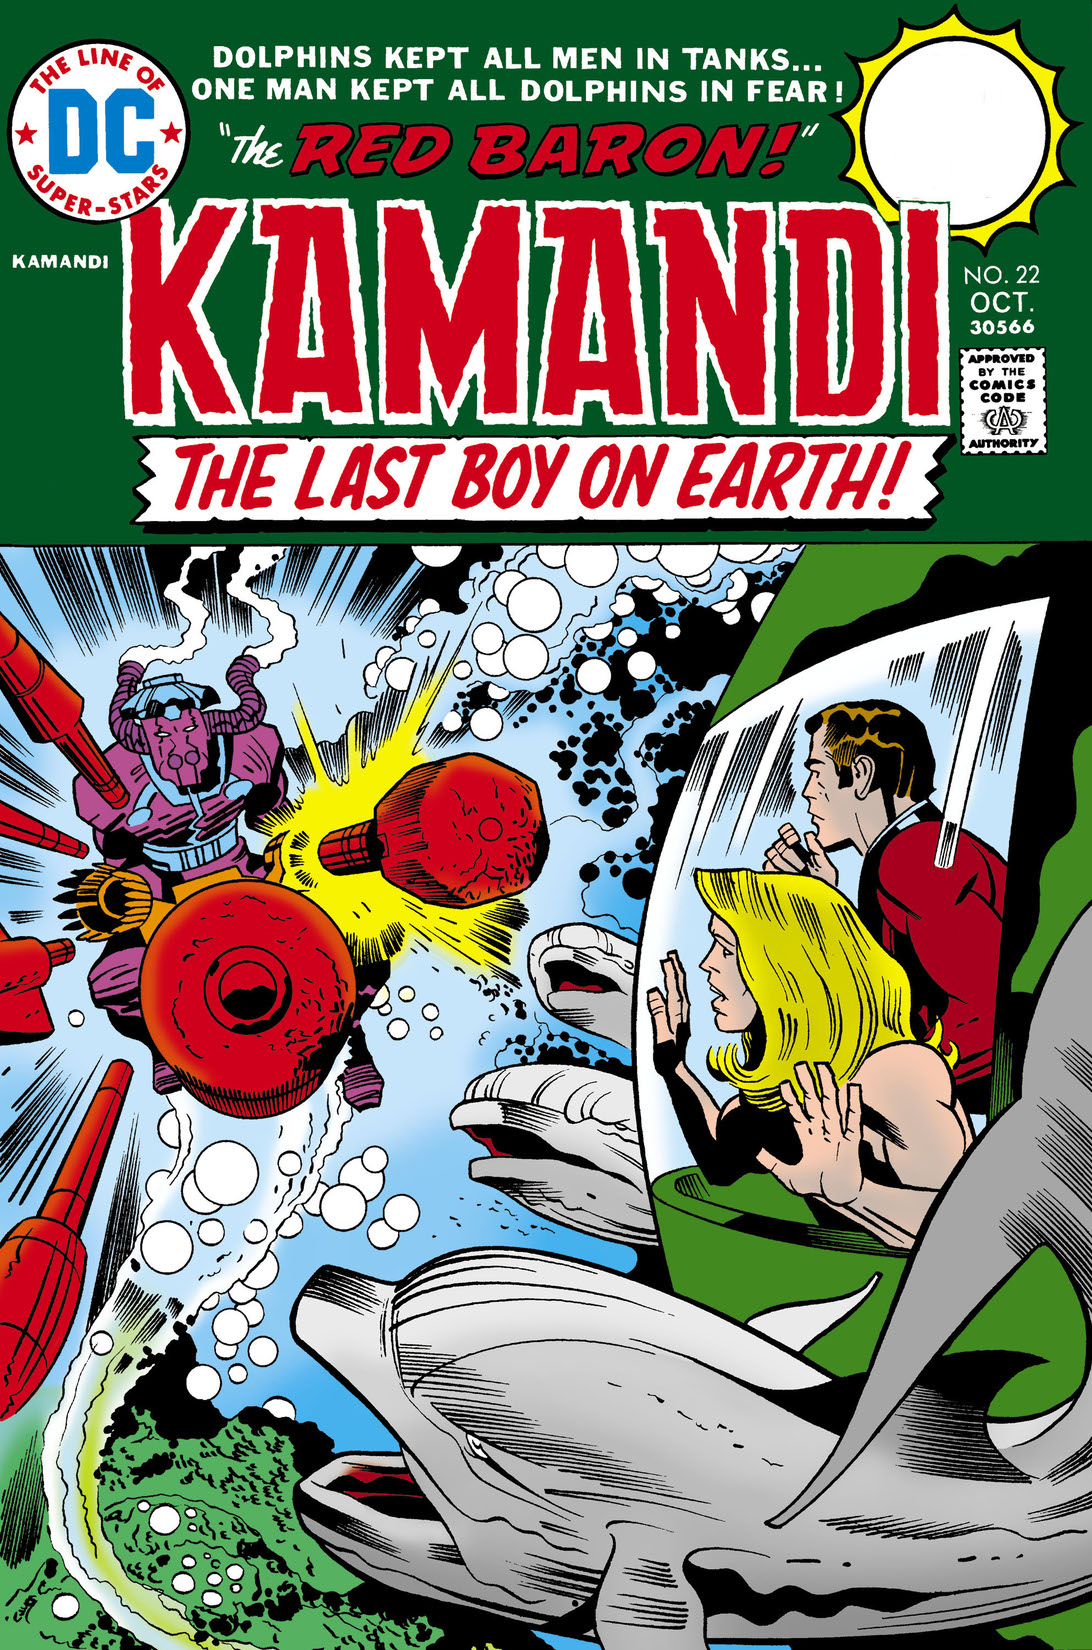 Kamandi: The Last Boy on Earth #22 preview images